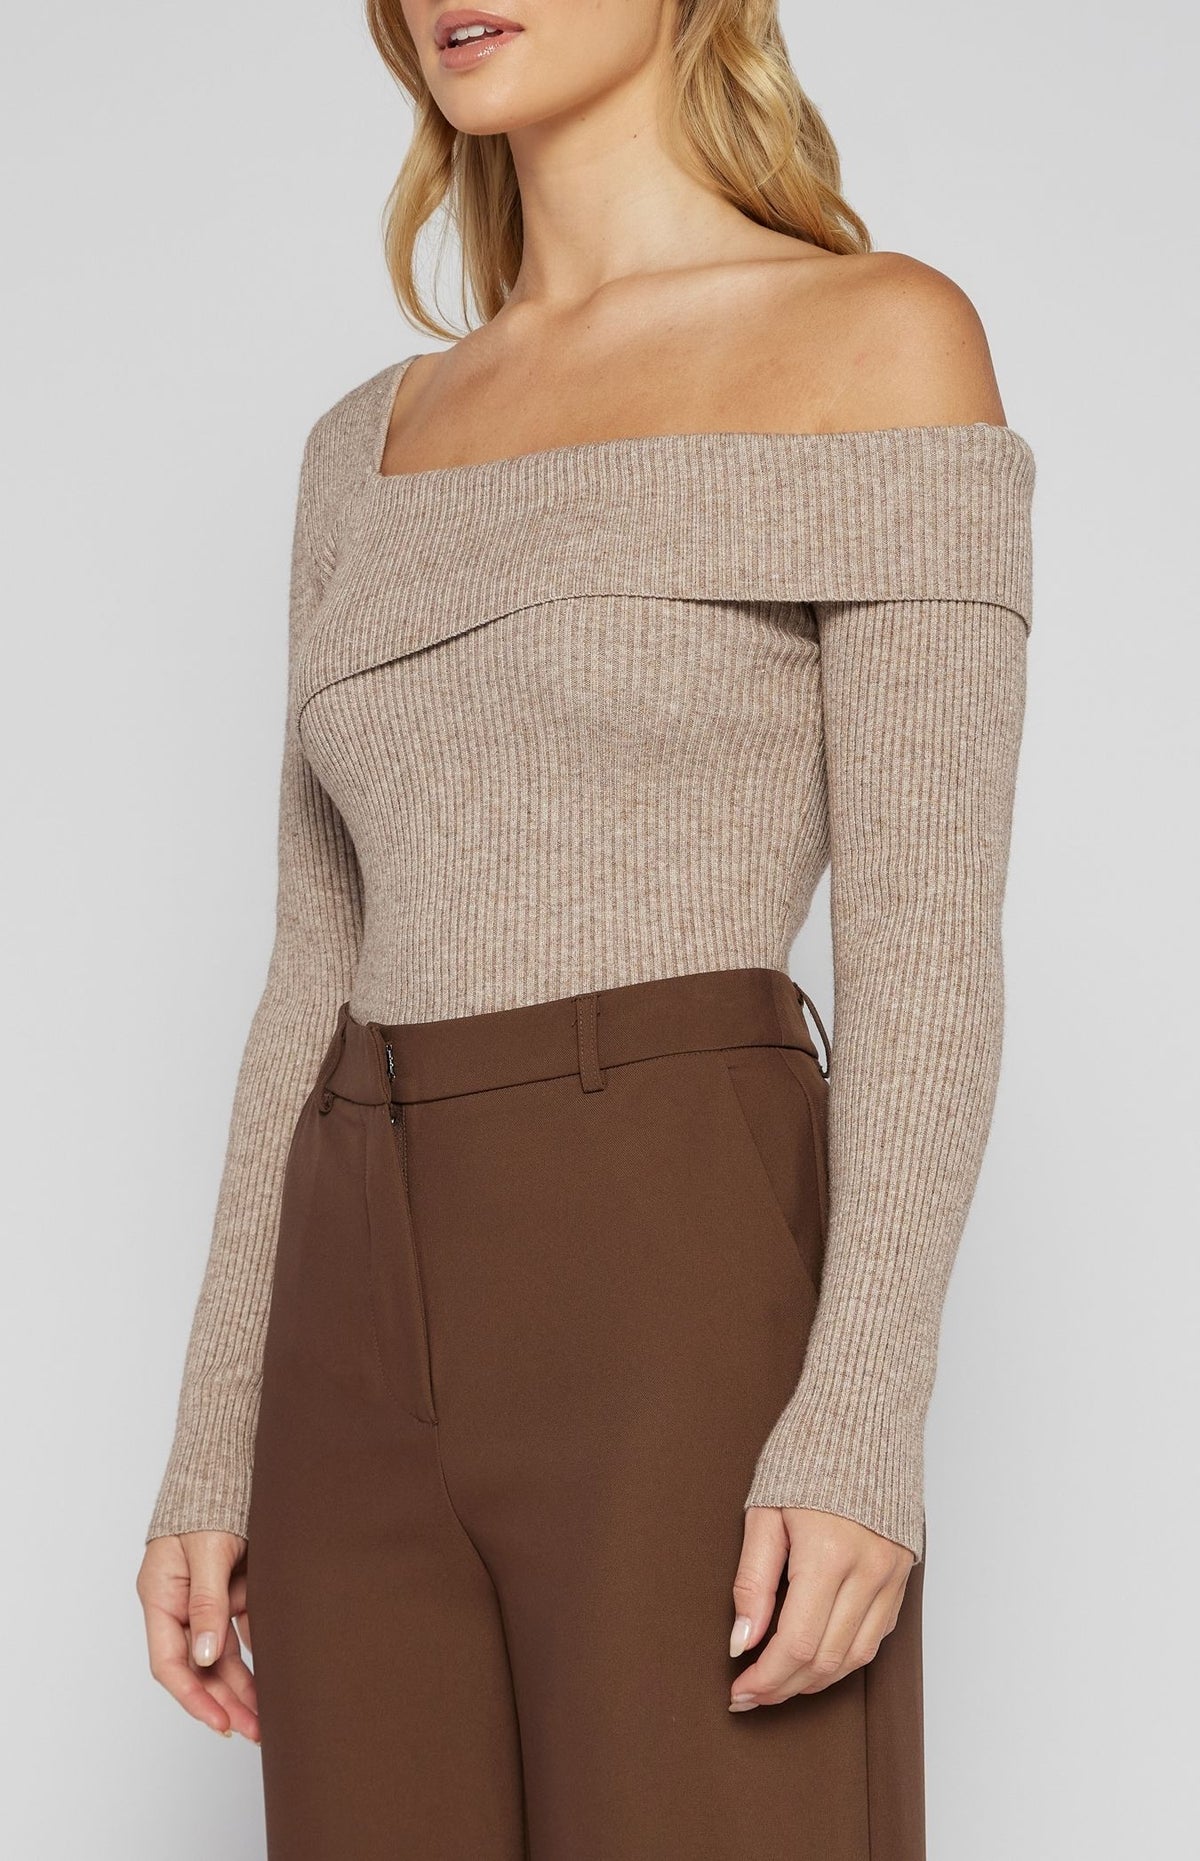 AMY BROWN MARL KNIT ONE SHOULDER TOP